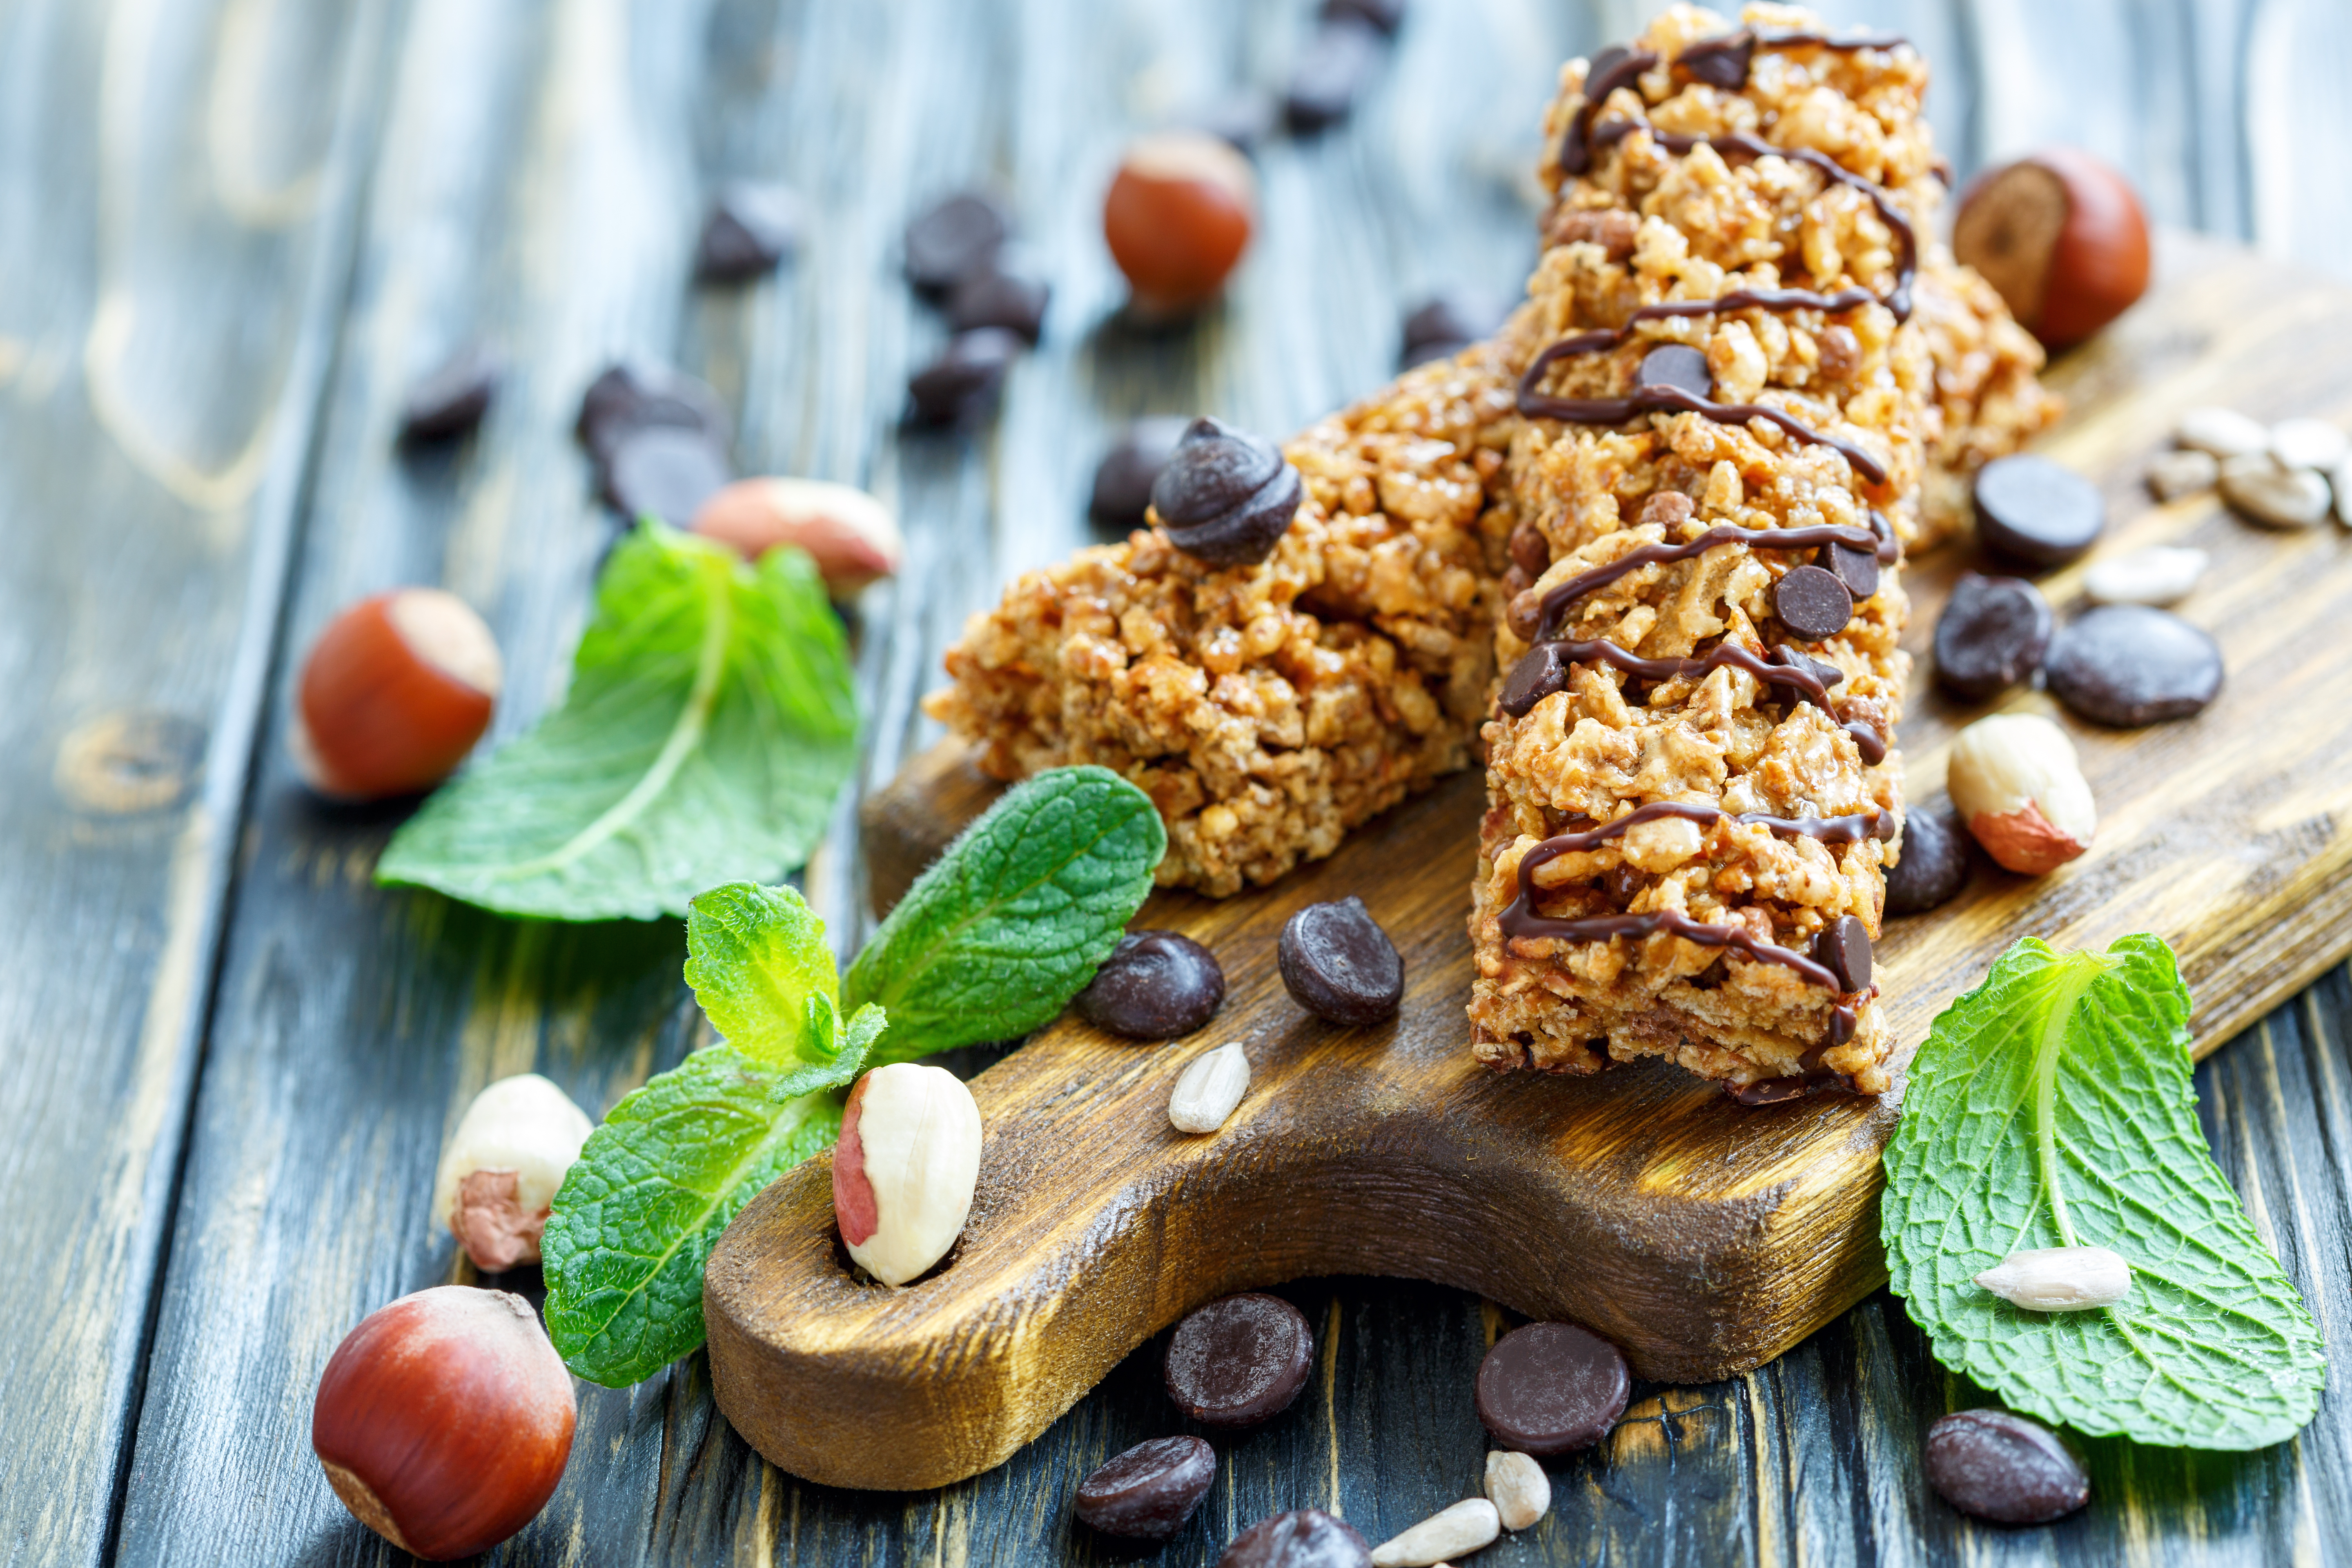 Cereal bars with nuts and chocolate on old wooden table, selective focus.